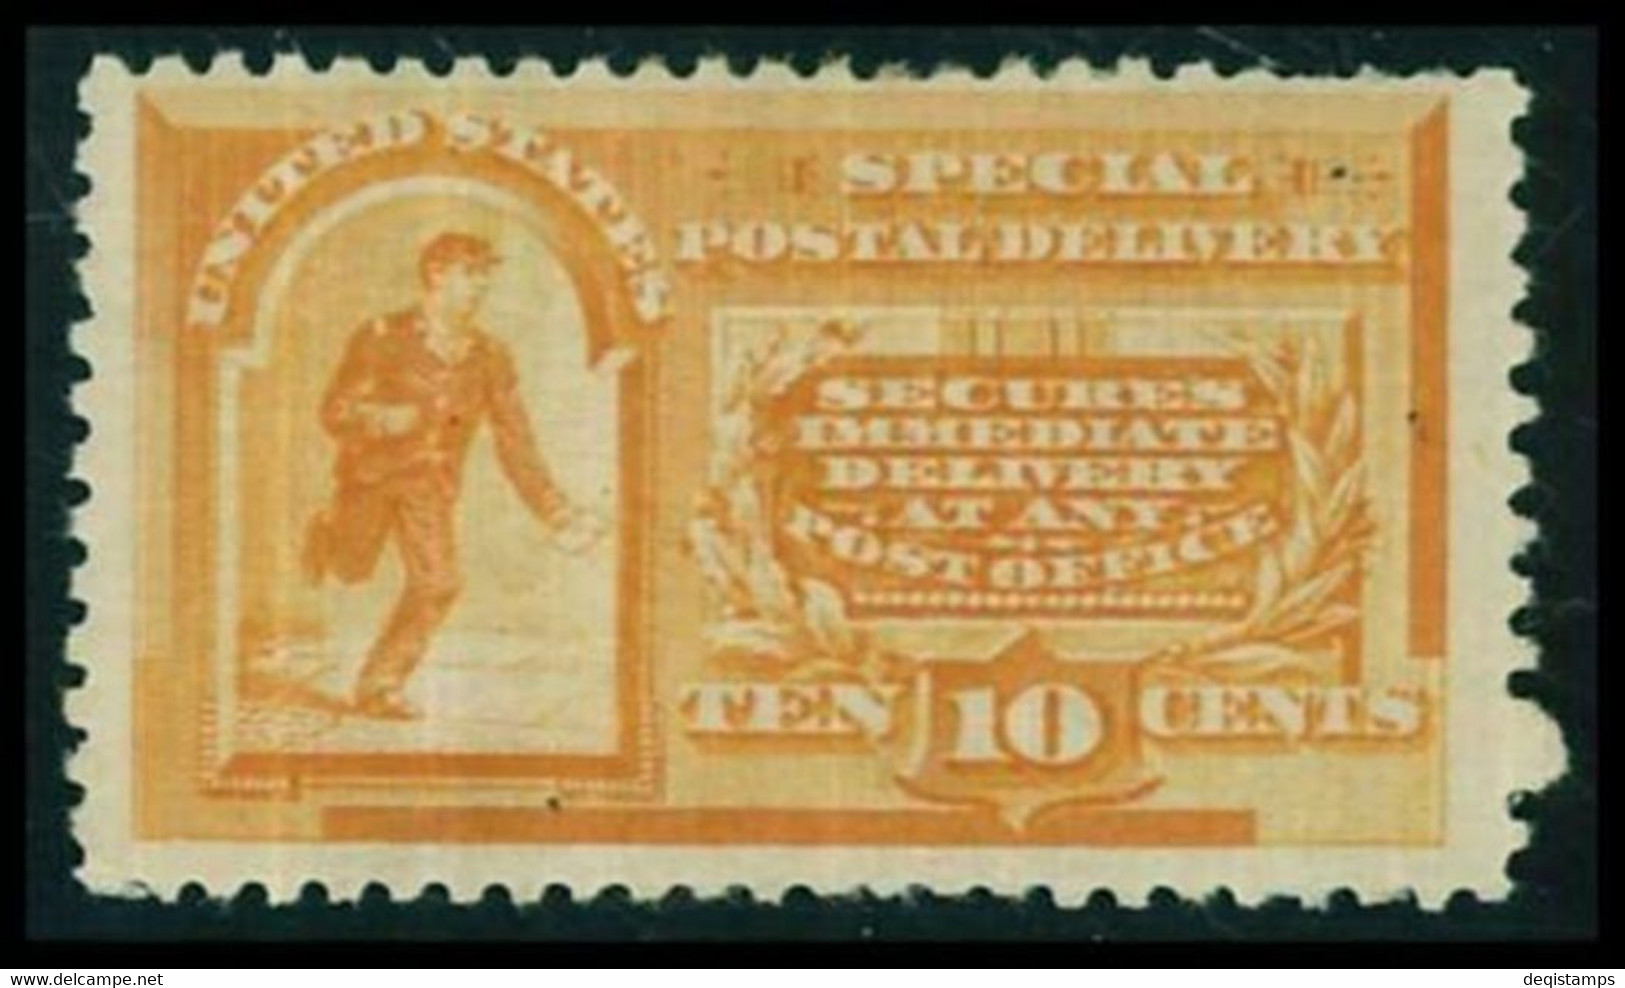 United States 1893 10 Cents ☀ Scott #E3 - 300 $ - Ongoing Courier ☀ MH* Unused - Special Delivery, Registration & Certified